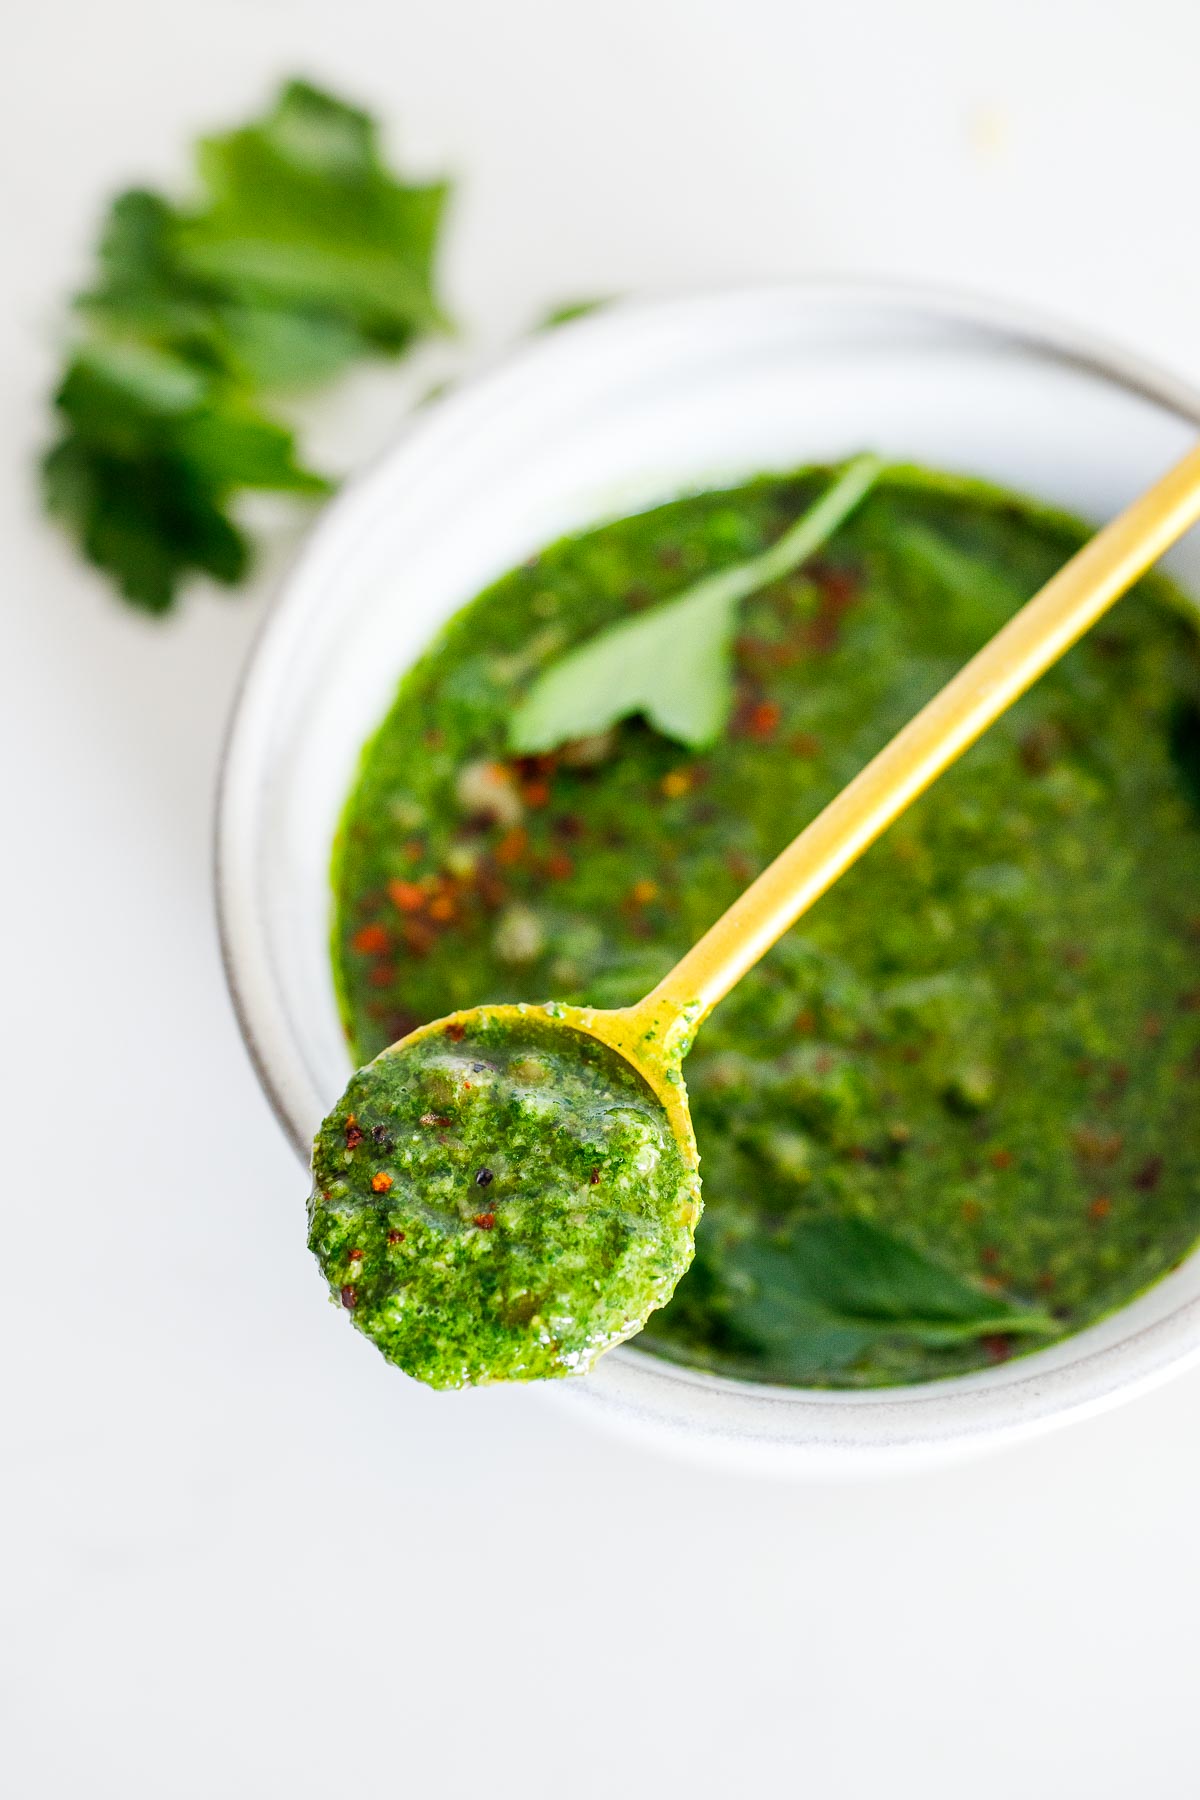 Italian Salsa Verde is punchy, vibrant and herbacious with delicious depth of flavor from anchovies and capers. Delicious on grilled or roasted fish, veggies, or meat. 